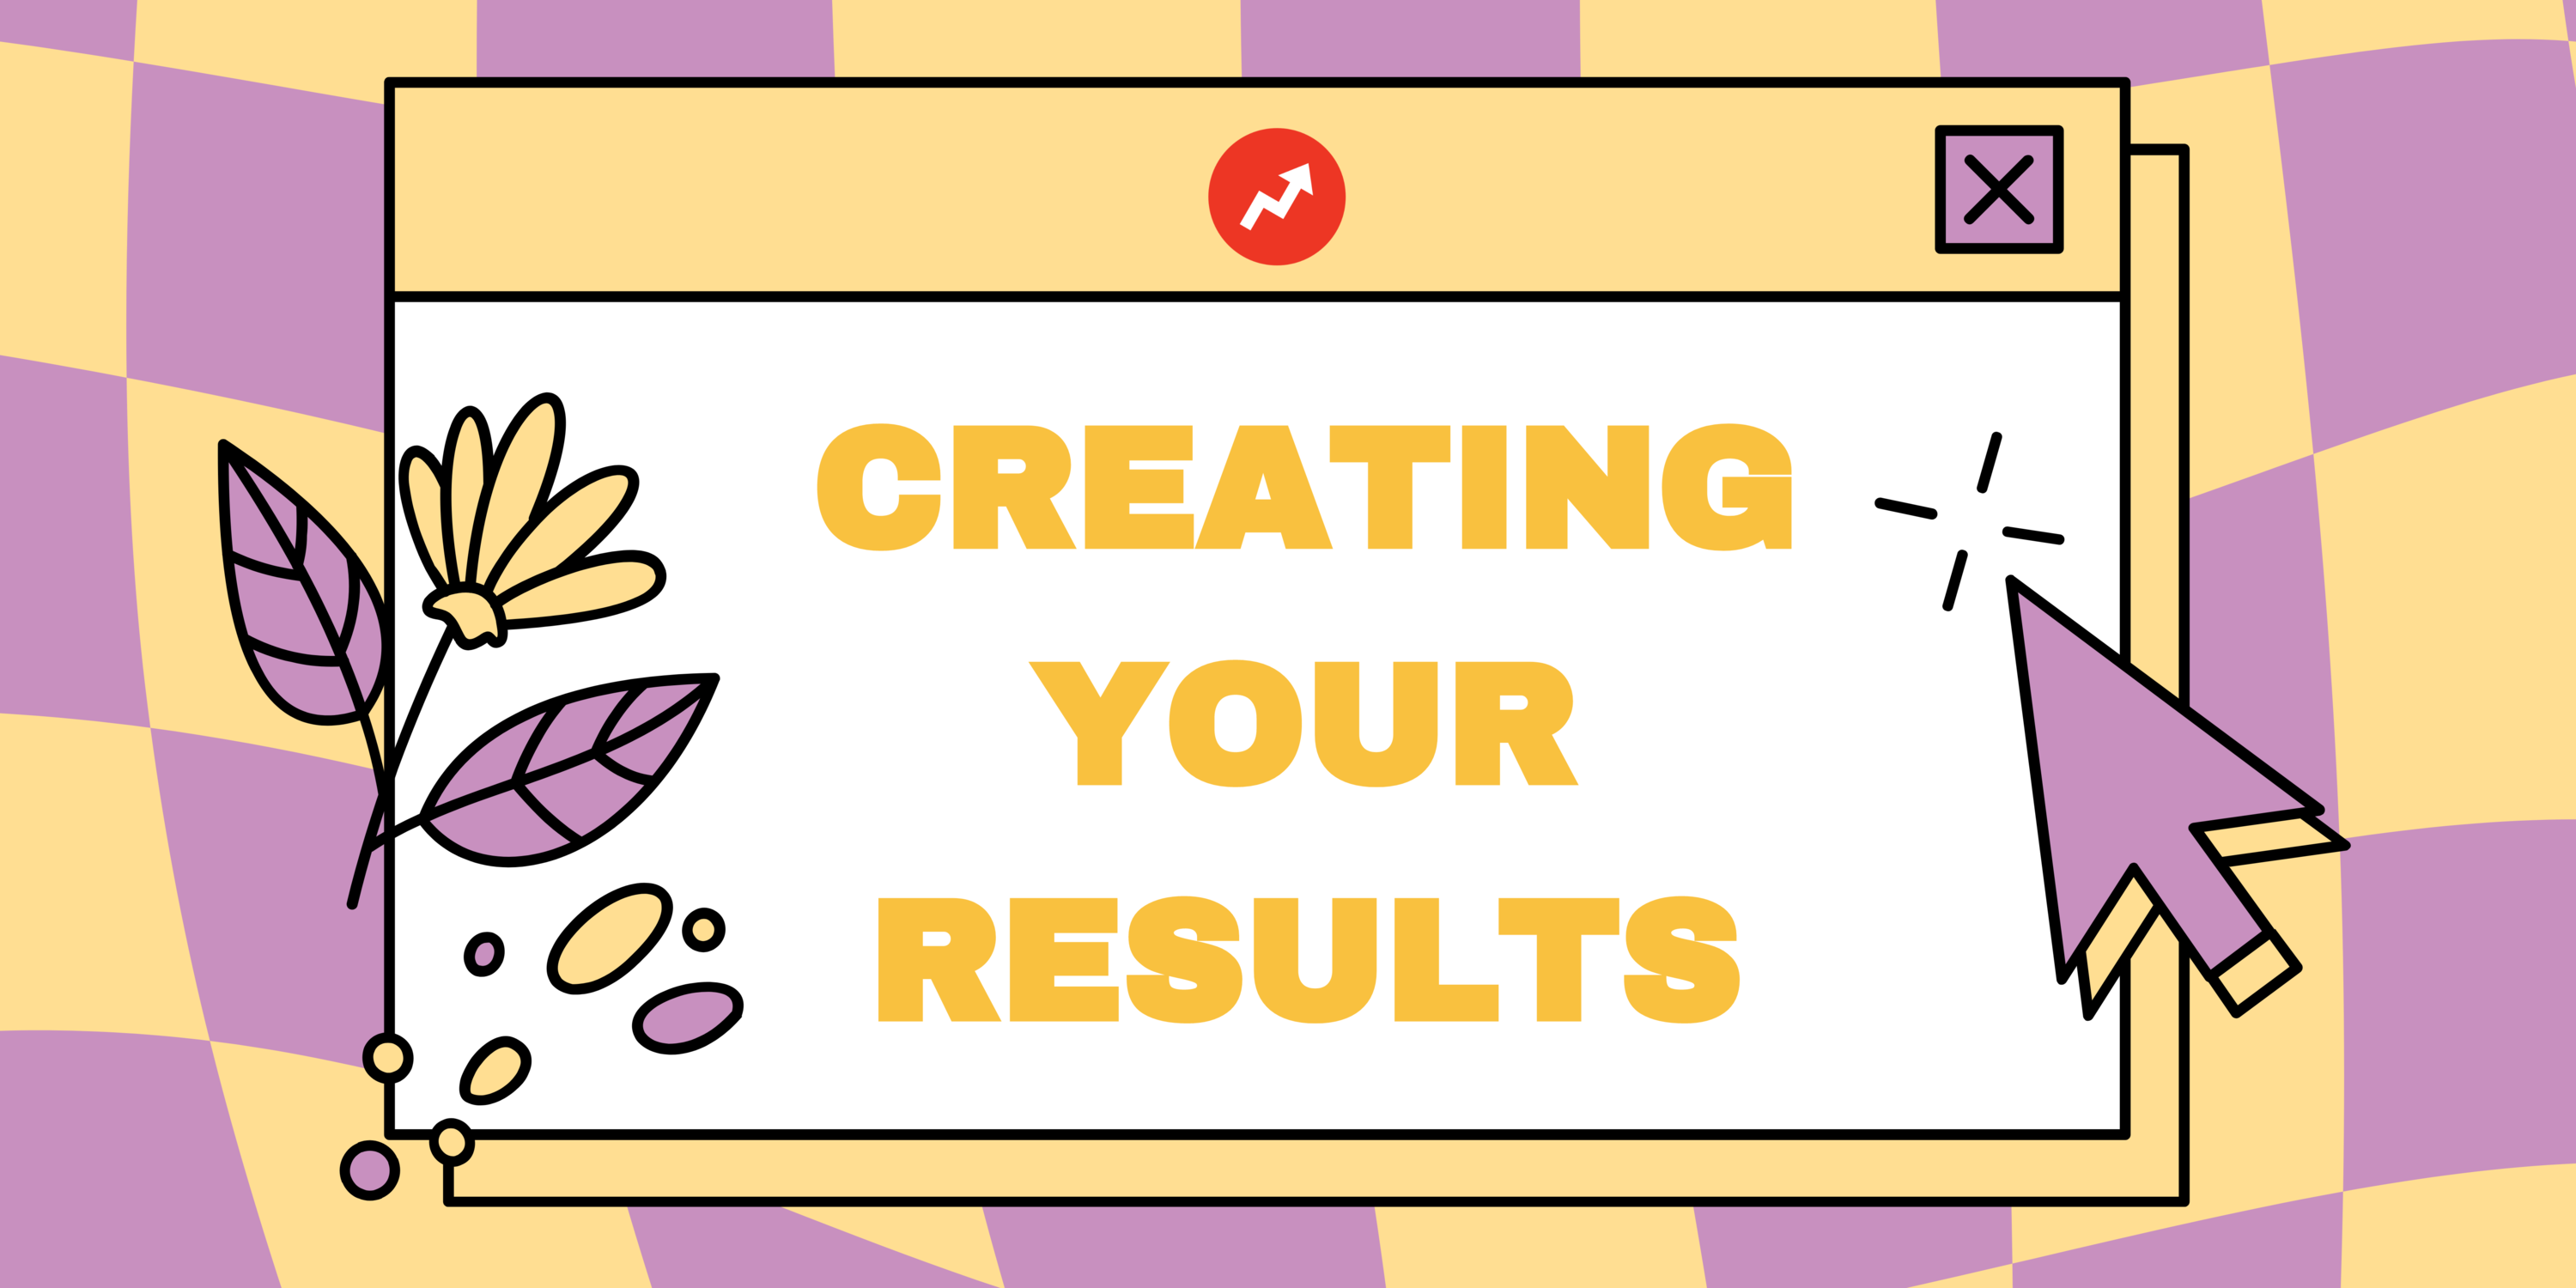 Creating your results